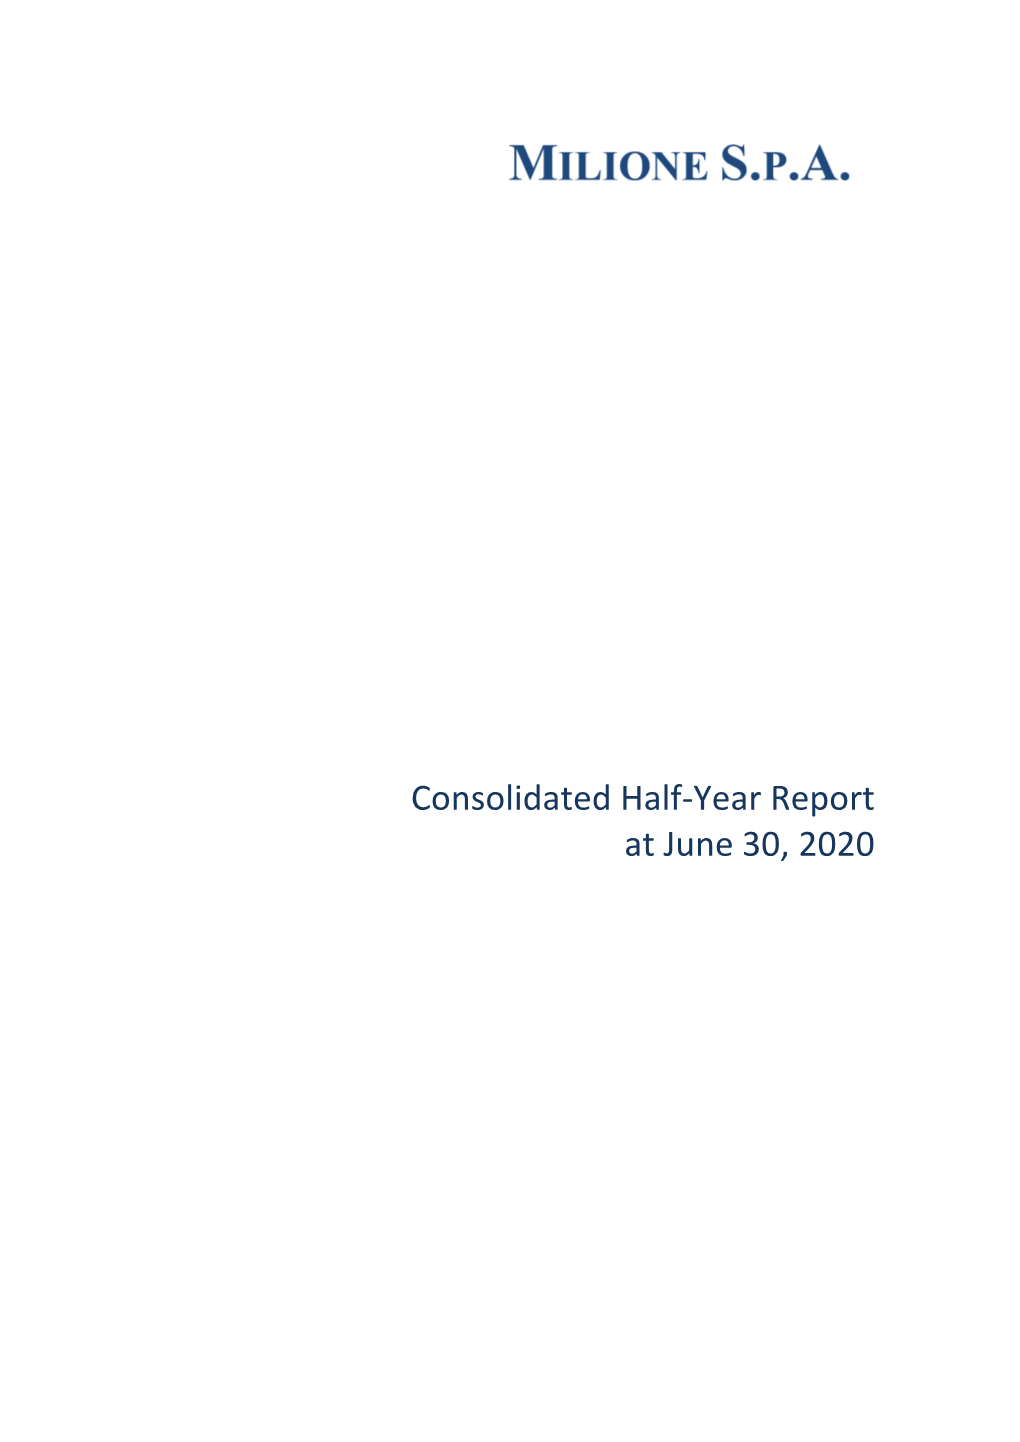 Consolidated Half-Year Report at June 30, 2020